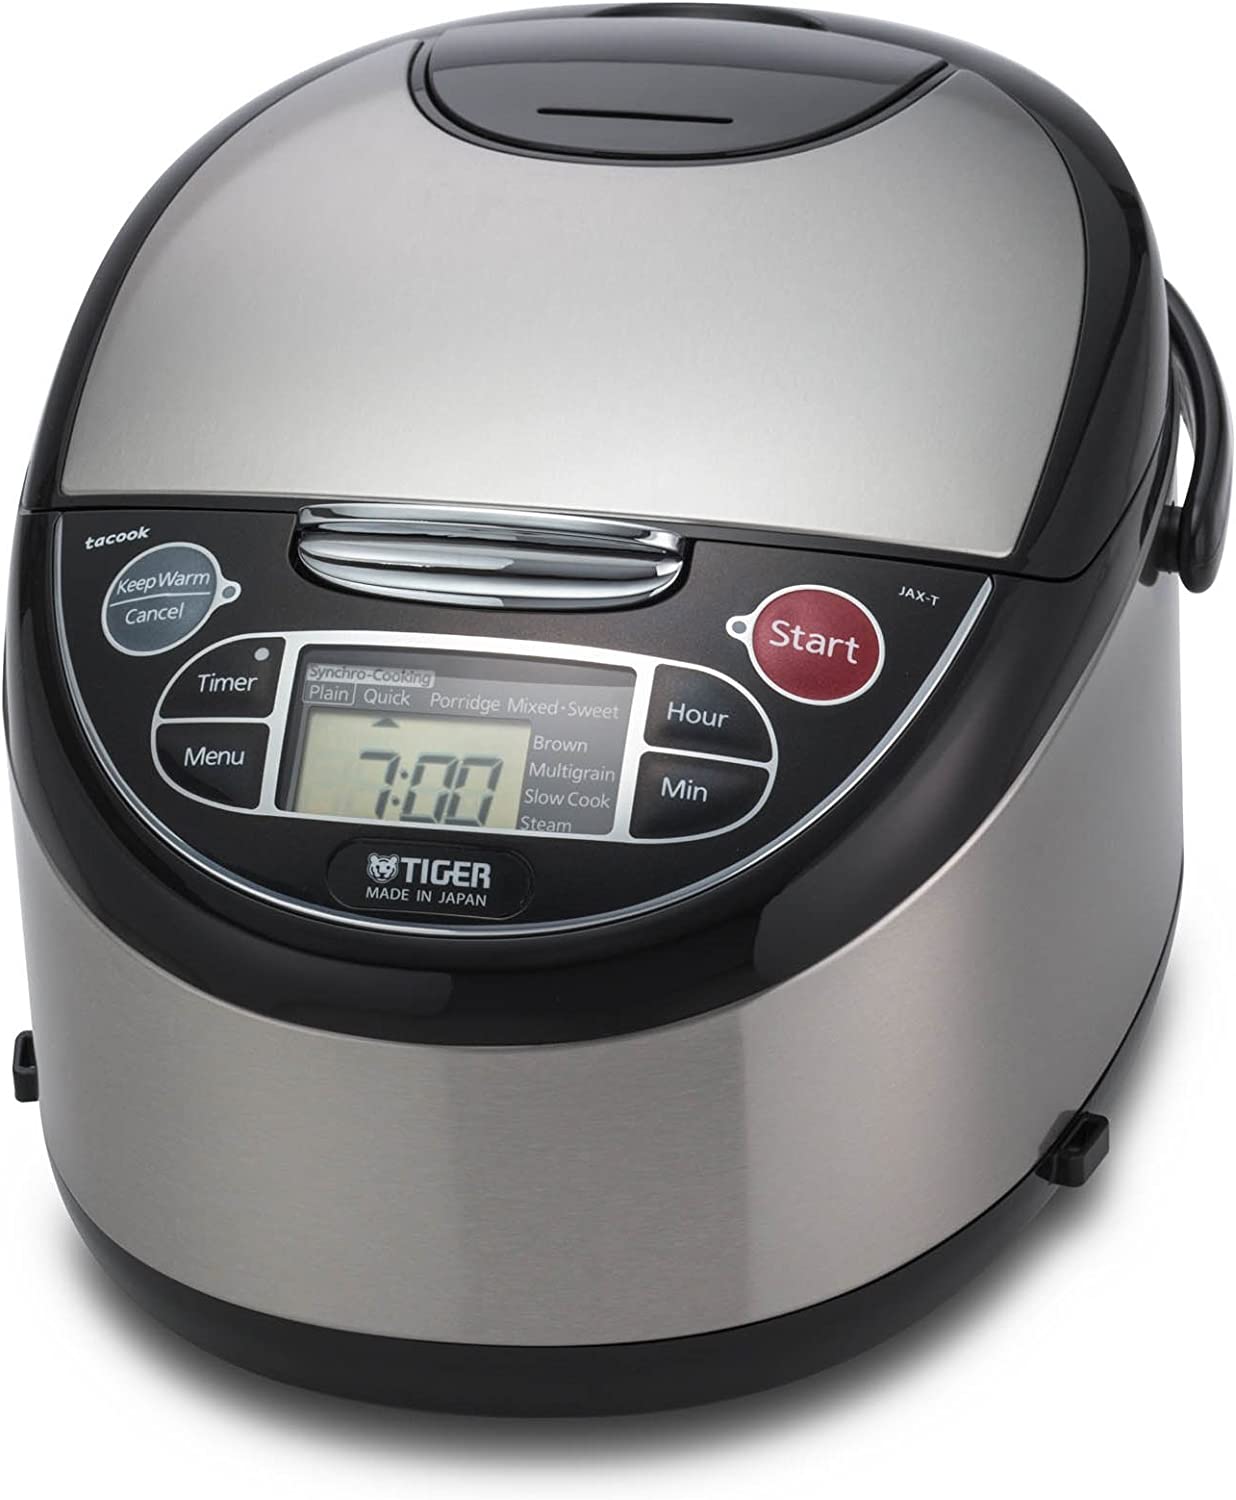 Tiger Micom Rice Cooker with Food Steamer & Slow Cooker, 5.5-Cup (Uncooked)